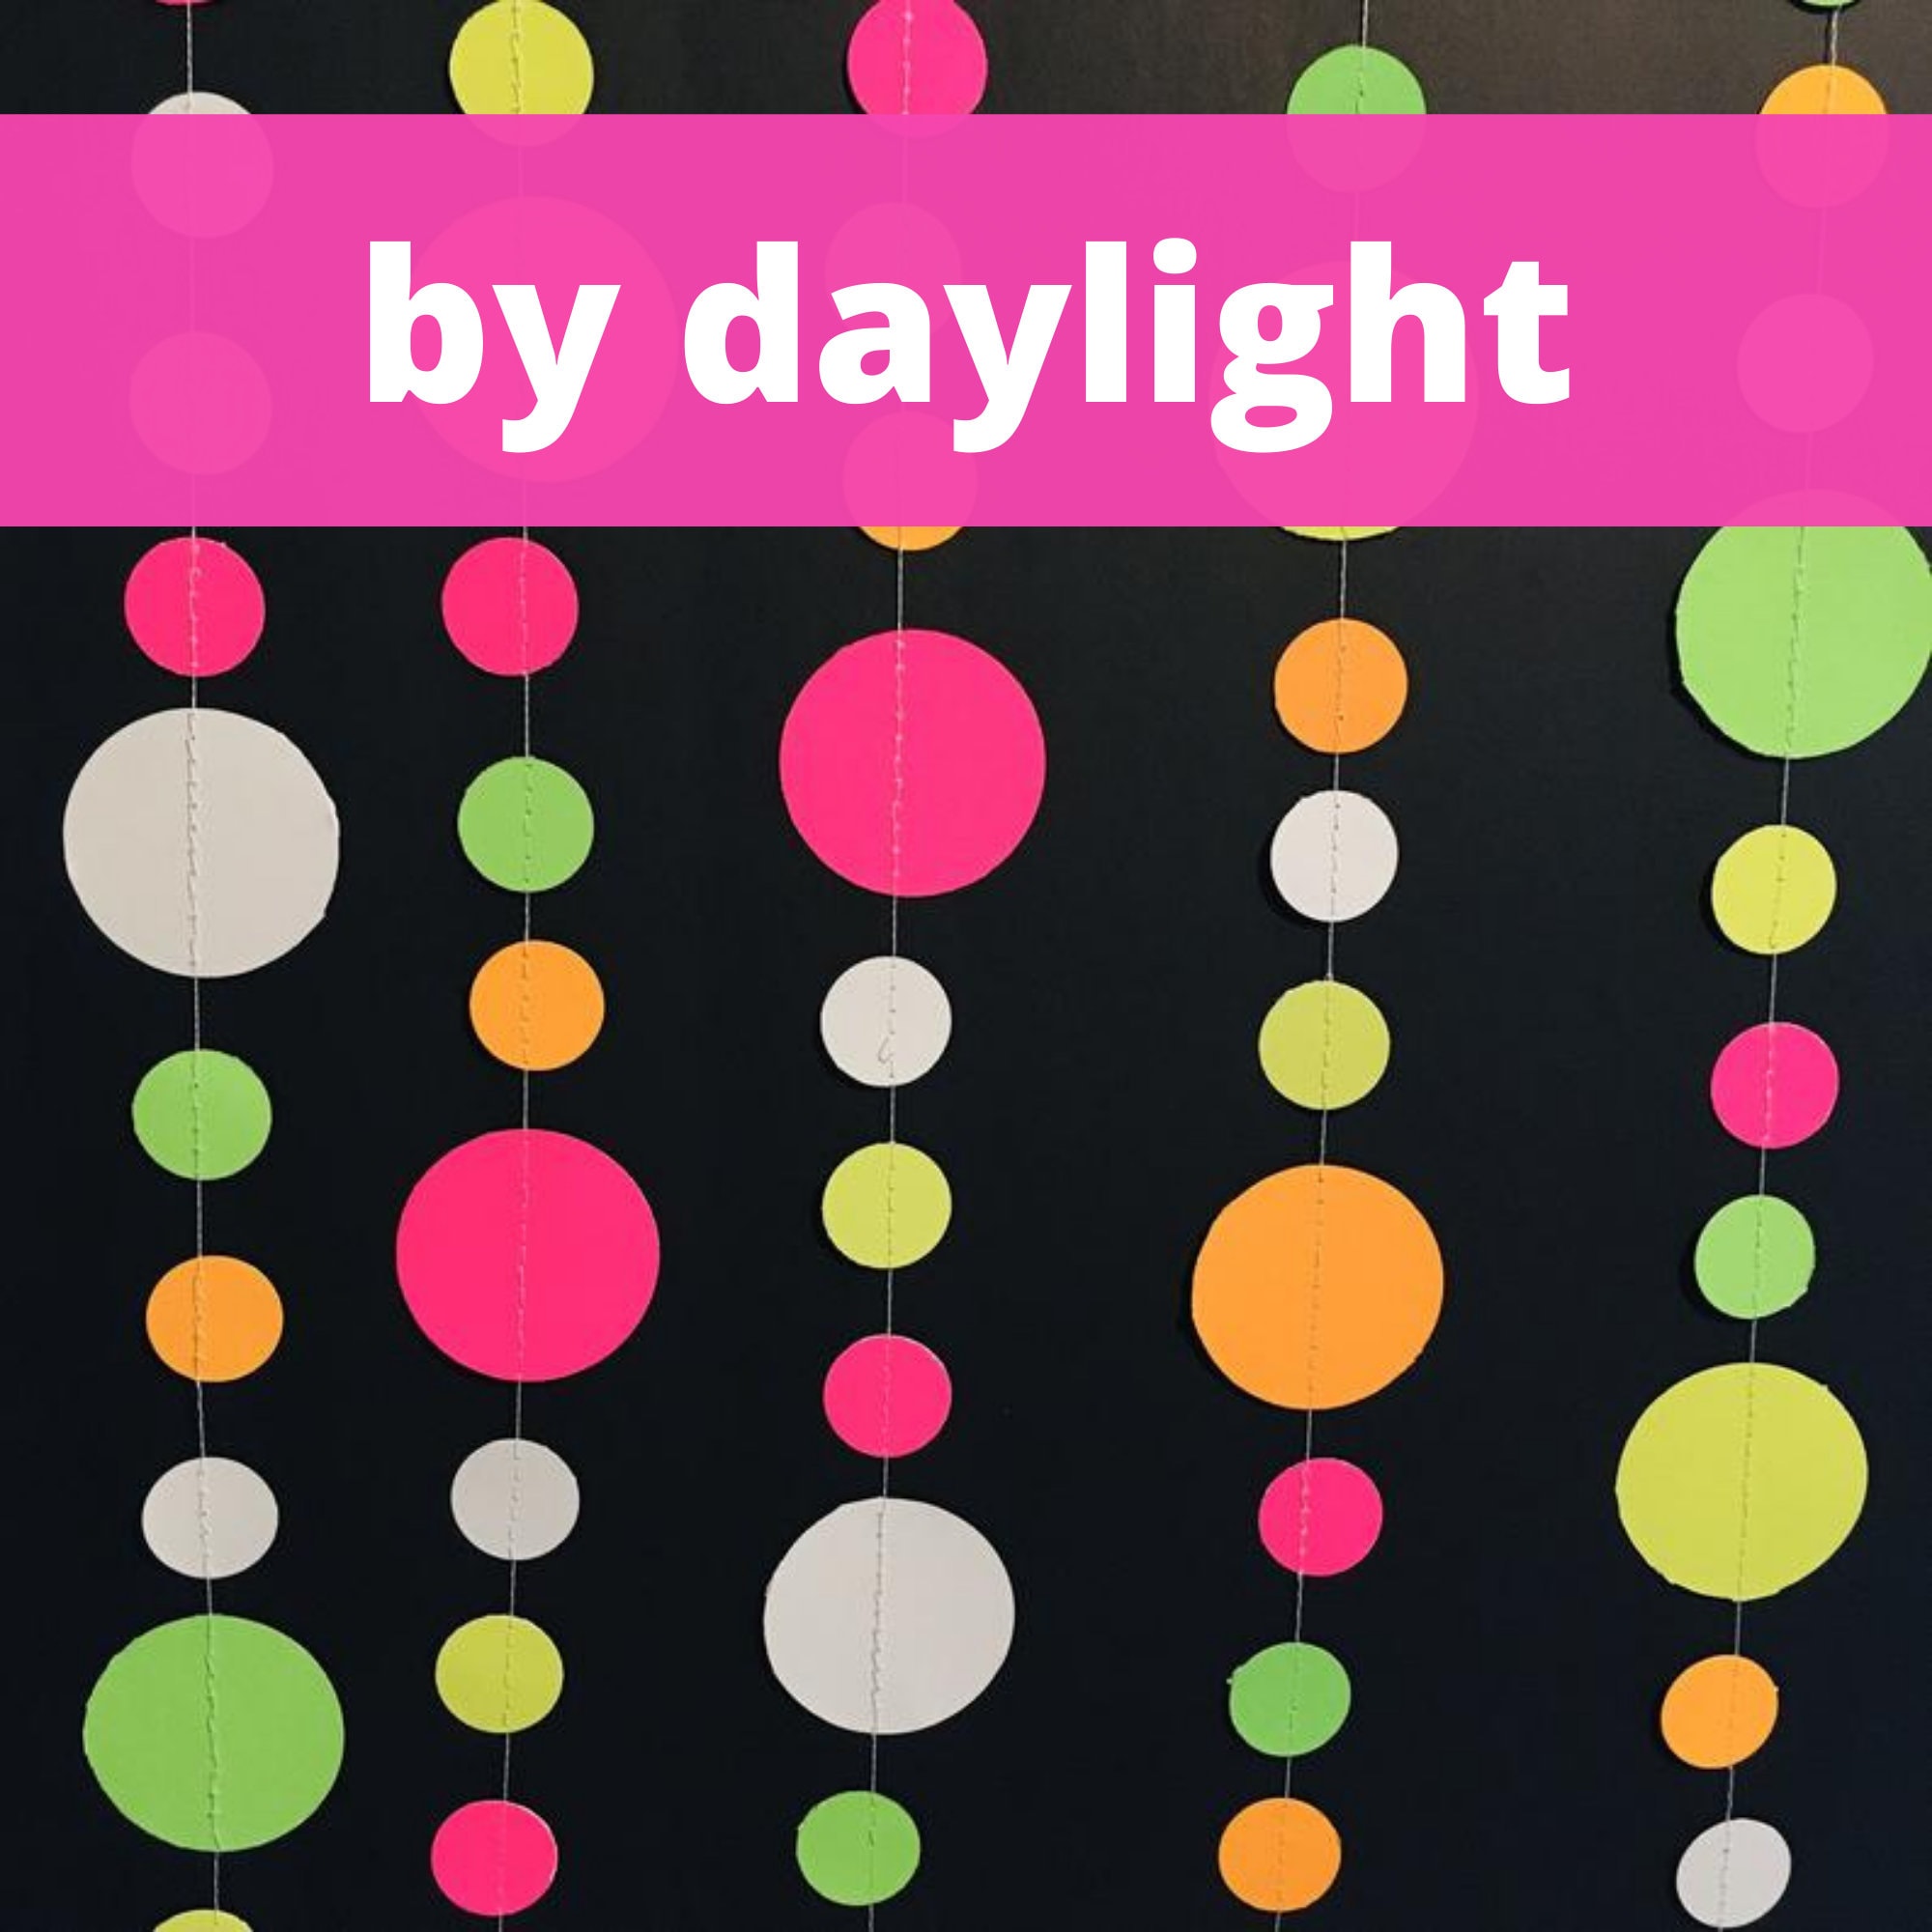 32 Sheets Neon Papers Glow Party Decorations,Neon Paper Garland Circle  Dots,UV Blacklight in The Dark for Dance Floor,Birthday,Wedding,Party